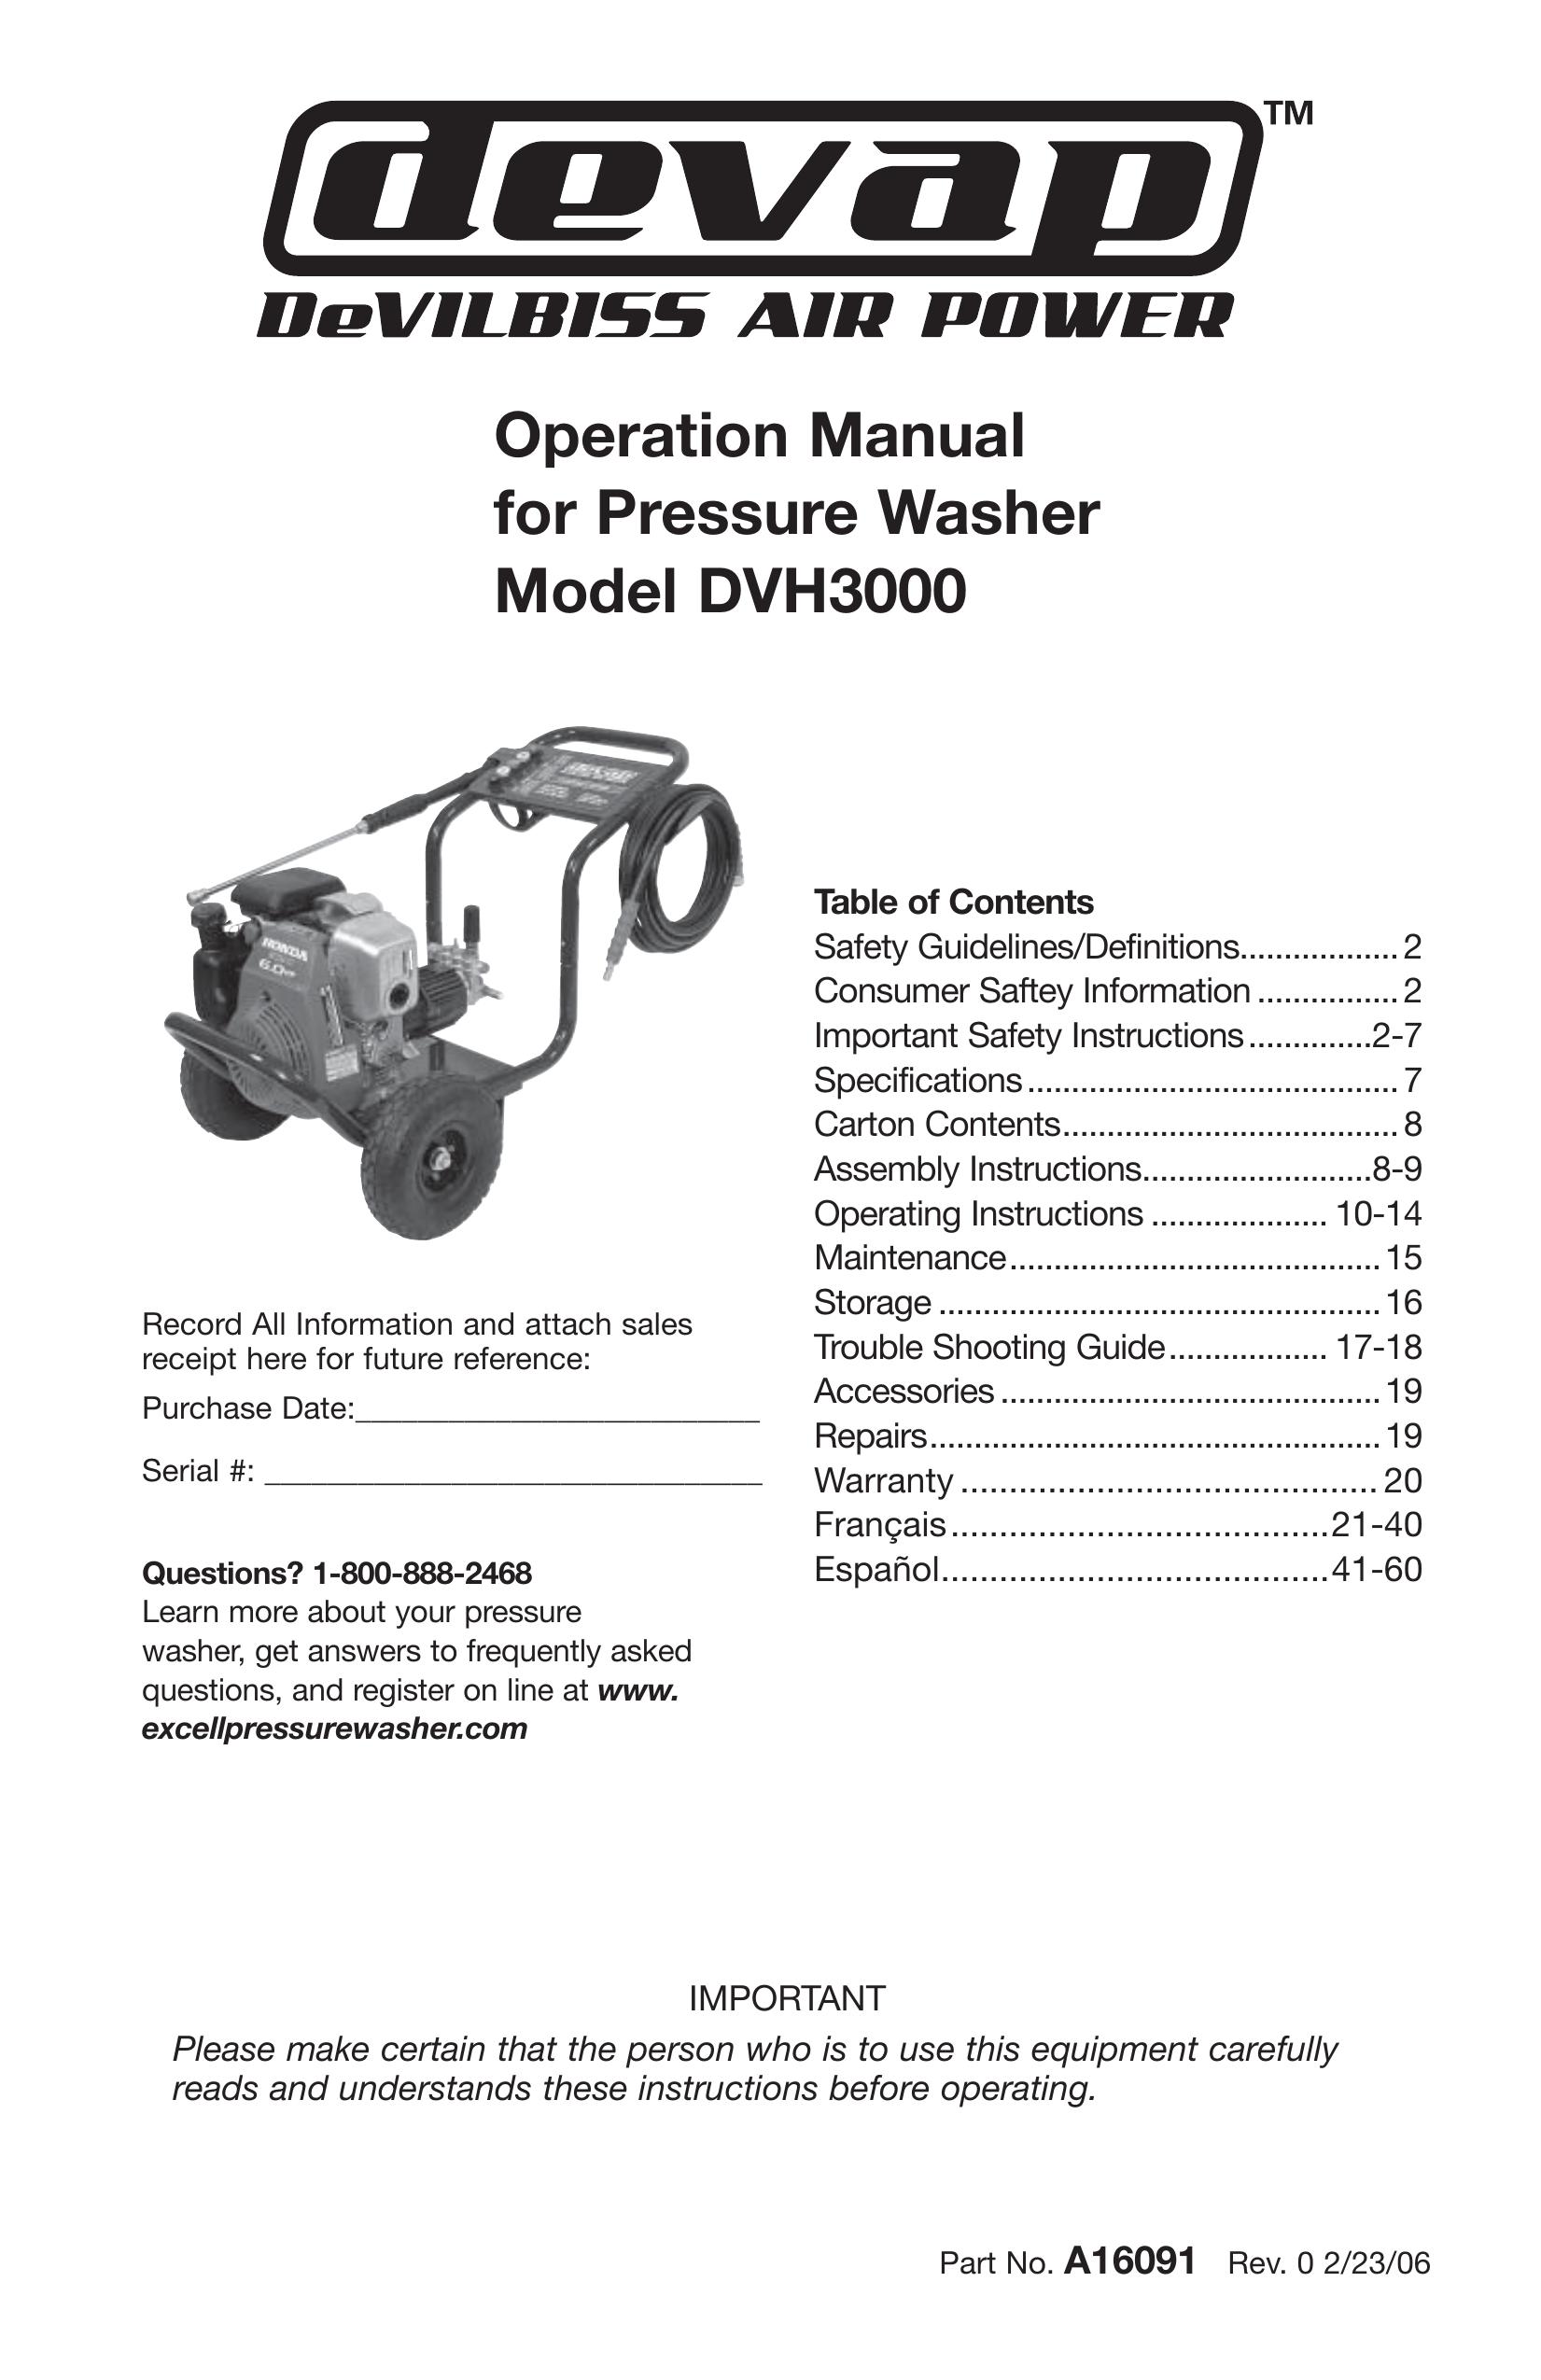 DeVillbiss Air Power Company A16091 Pressure Washer User Manual